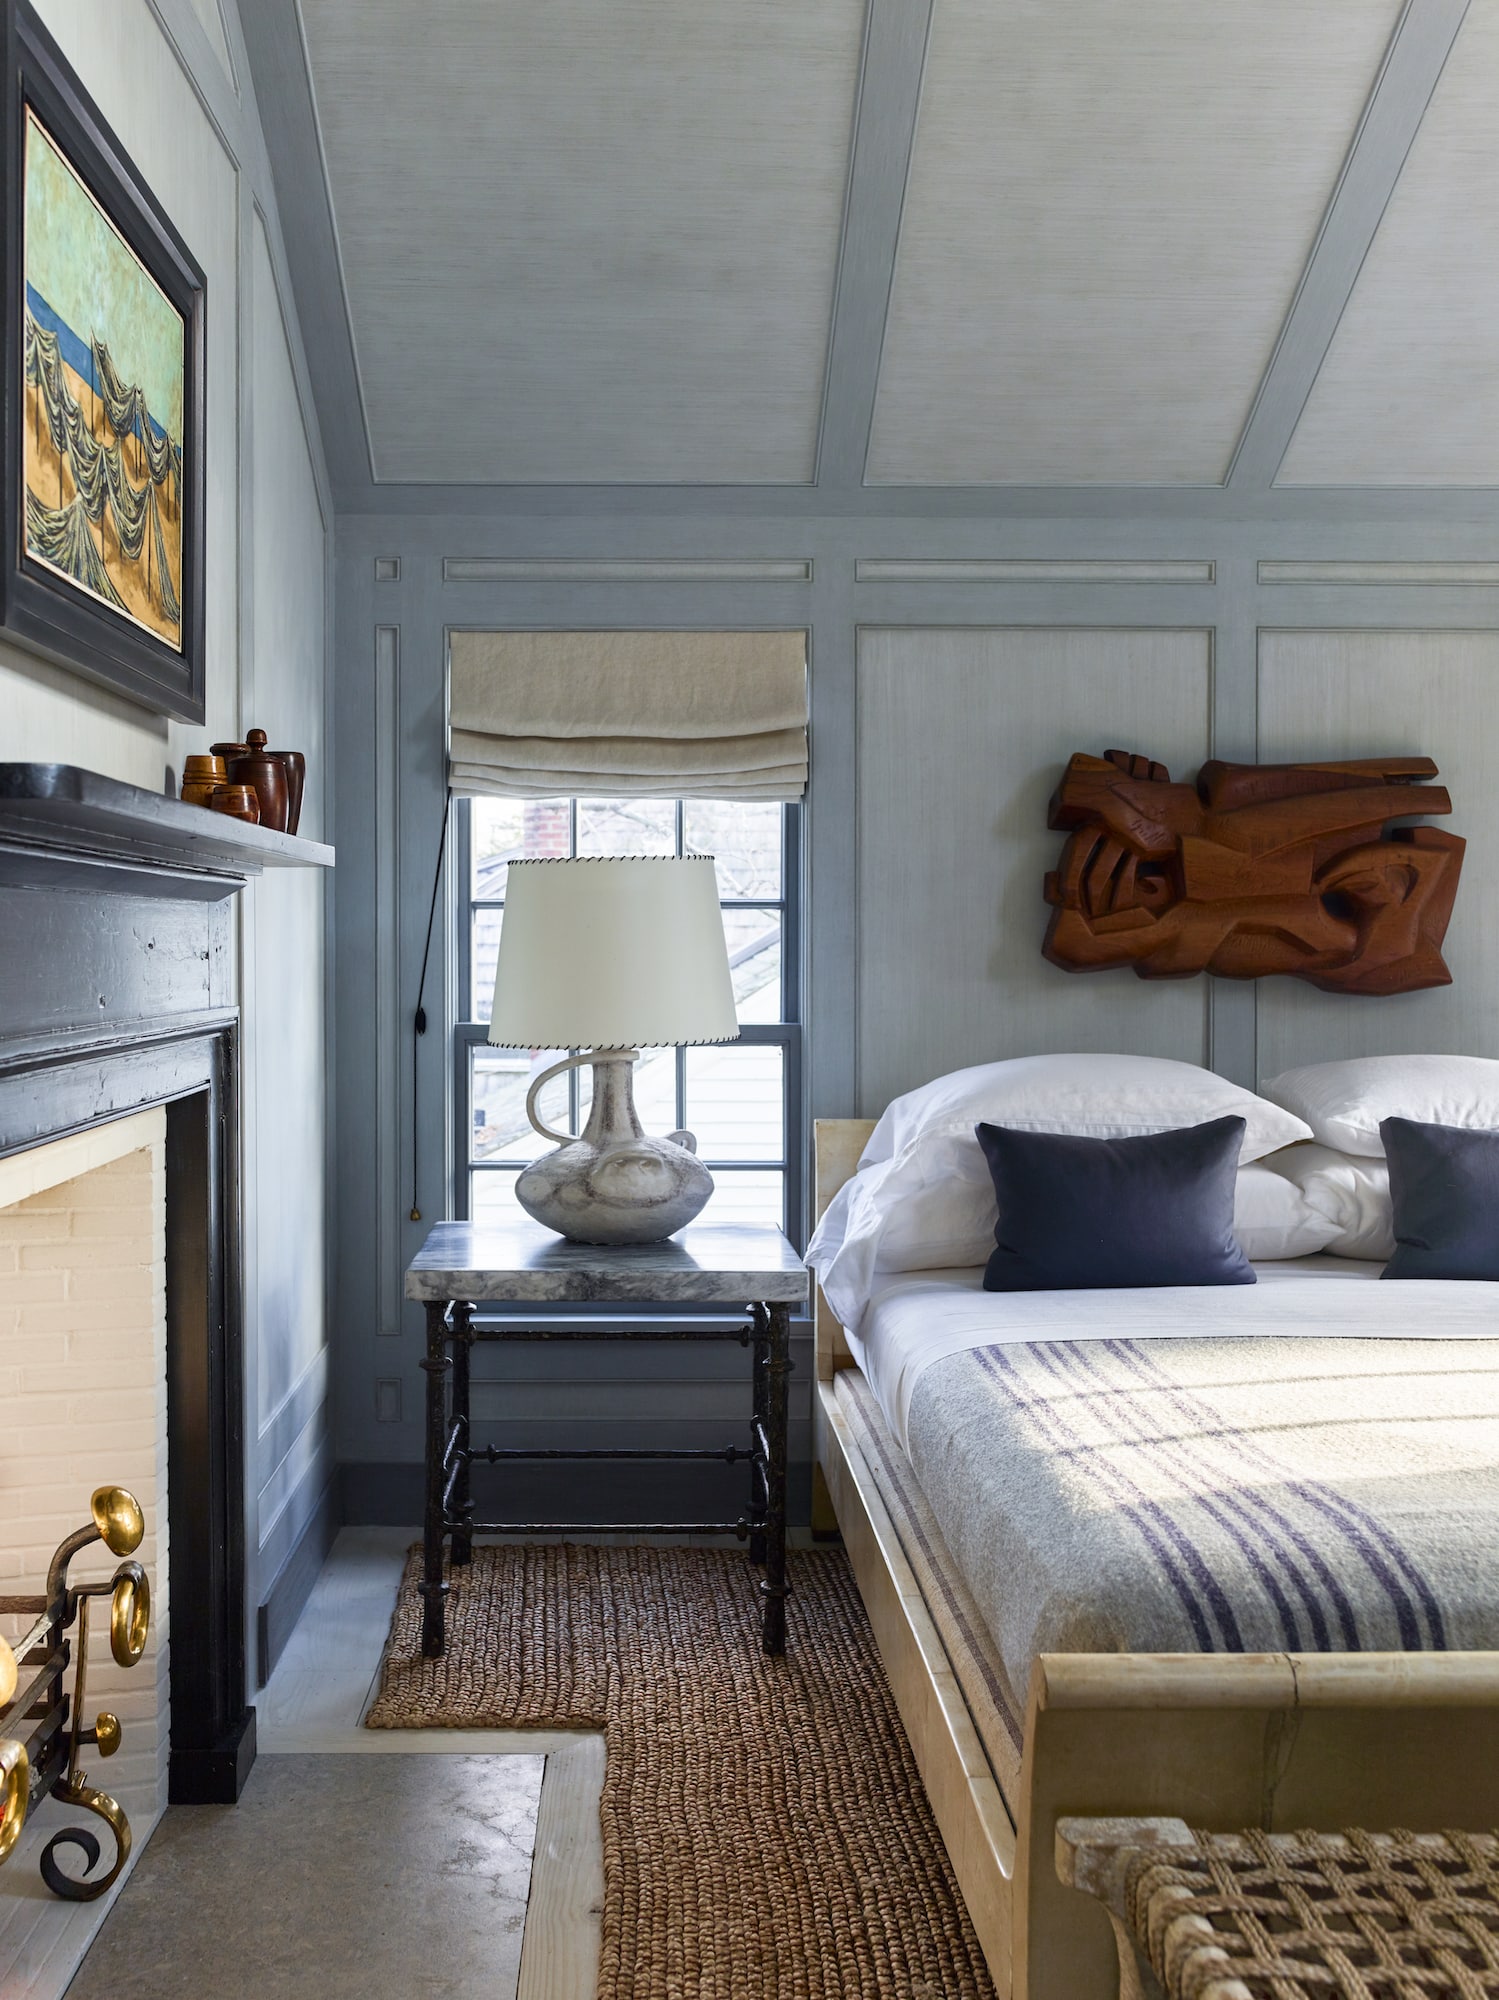 A Room We Love from the 1stDibs 50: S.R. Gambrel